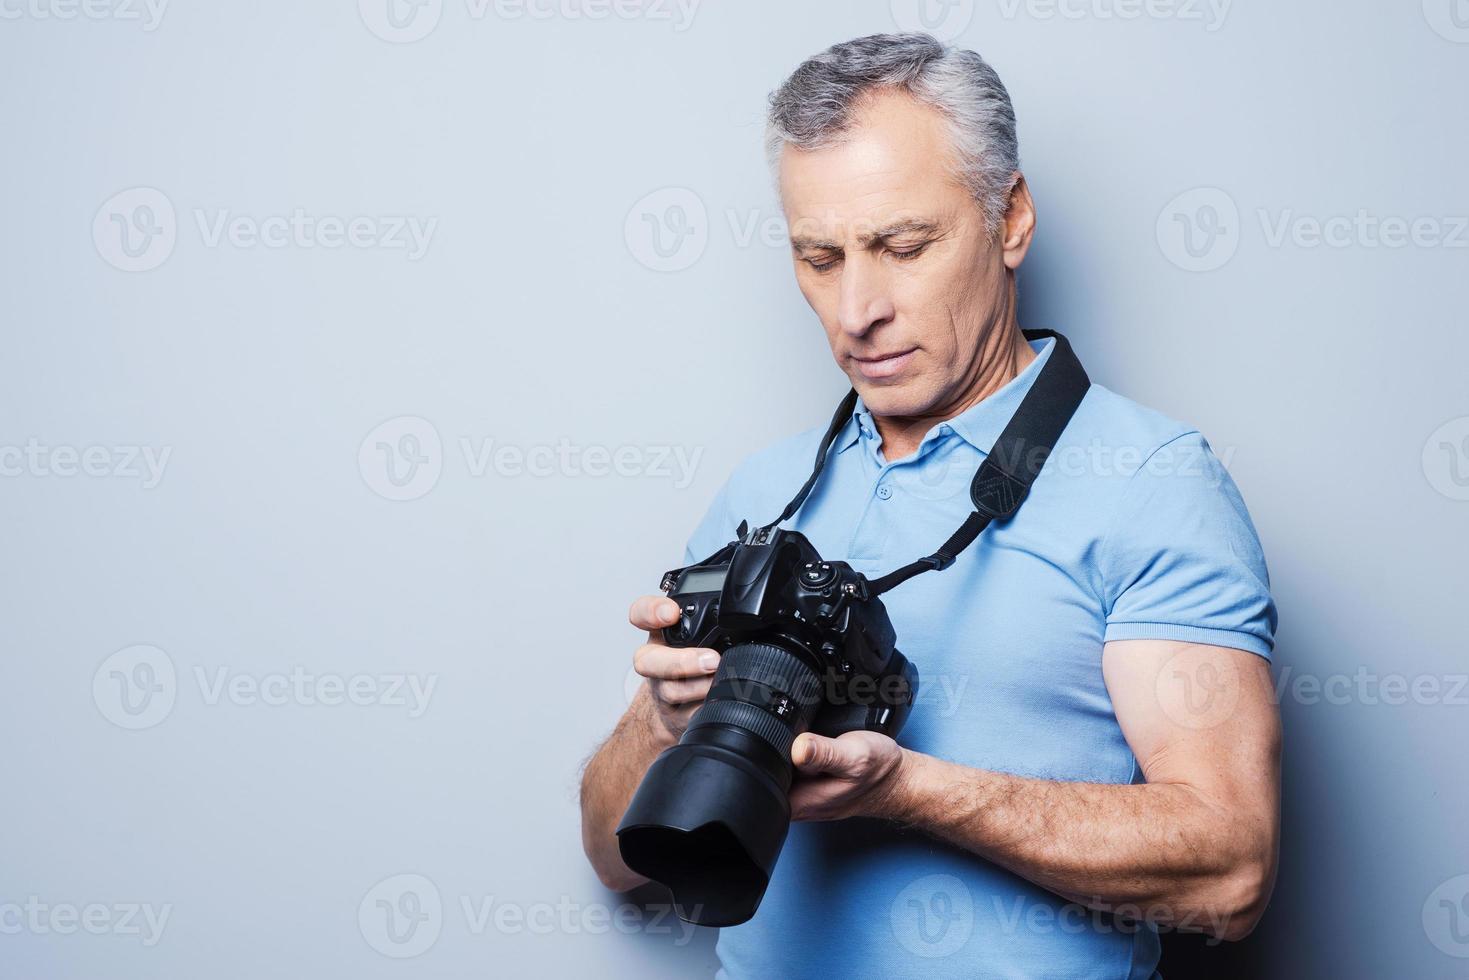 Setting the camera. Portrait of senior mature man in T-shirt holding camera while standing against grey background photo